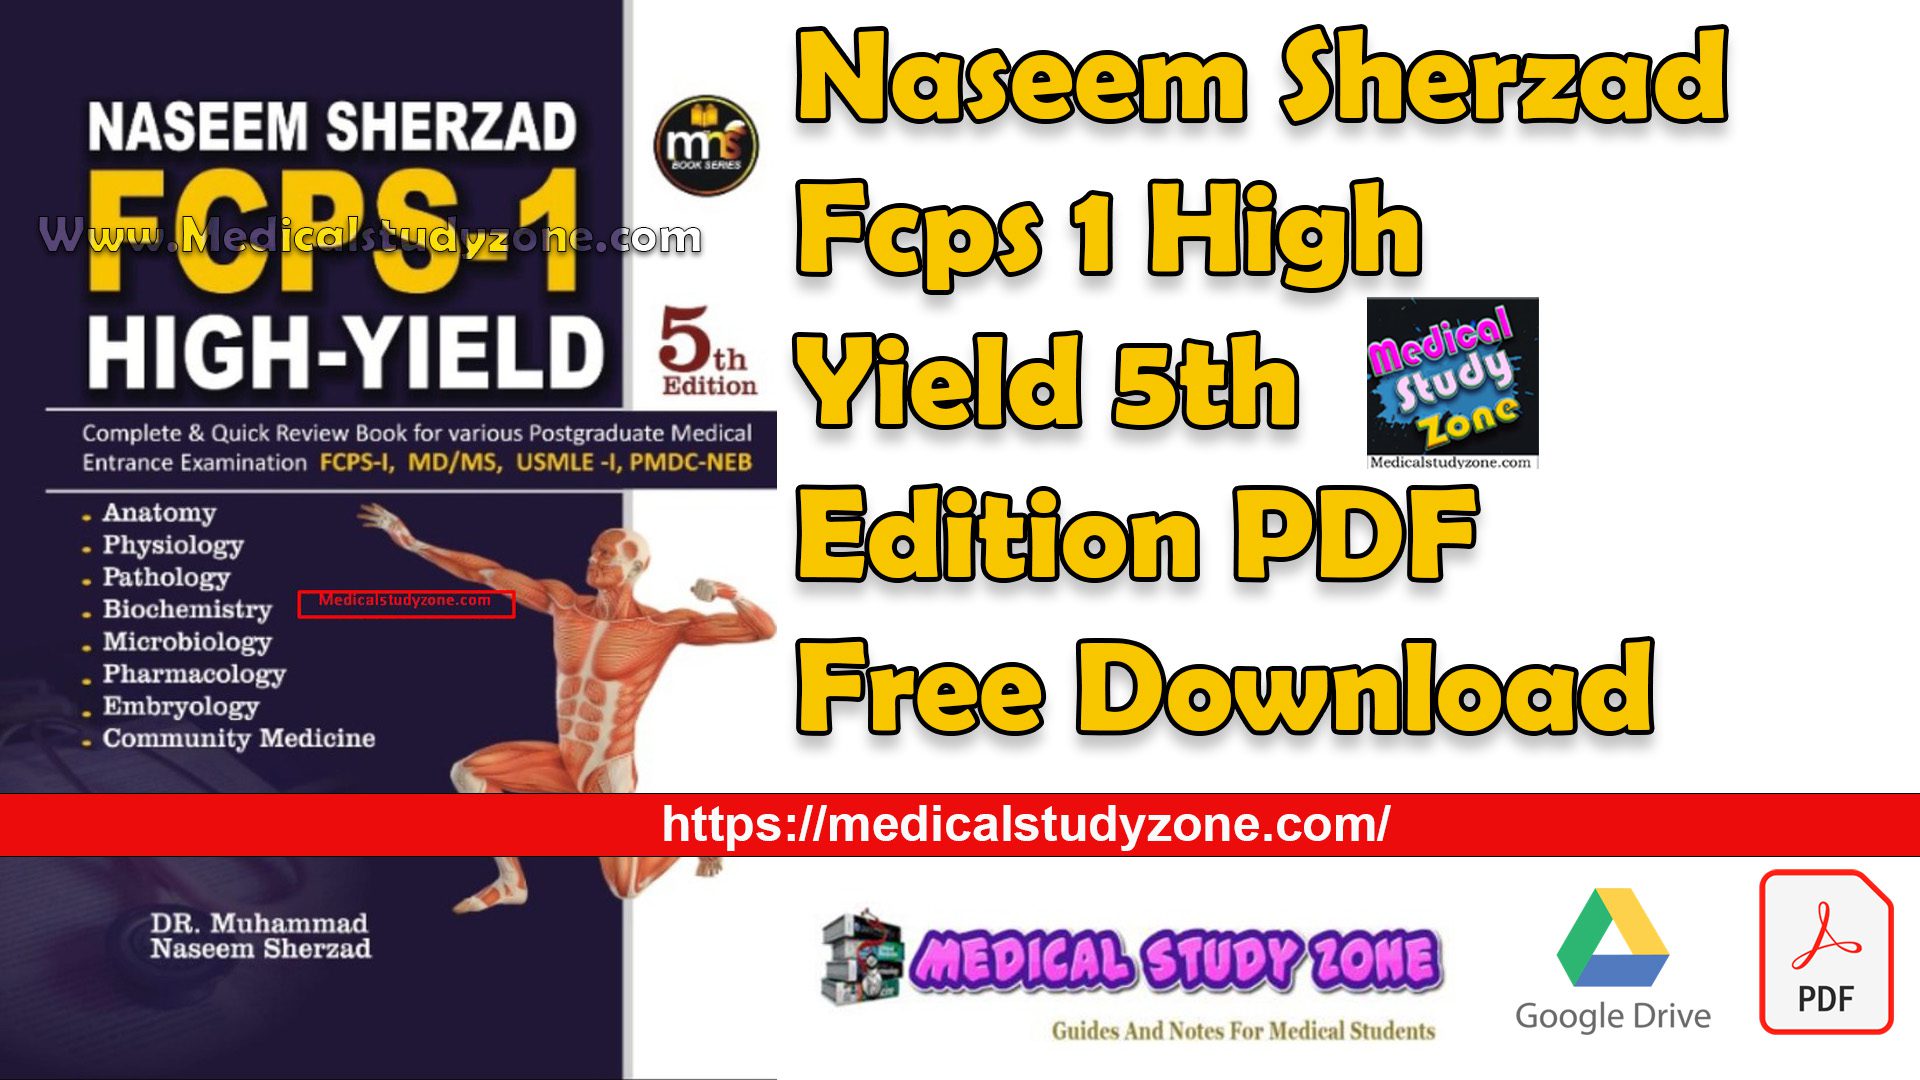 Naseem Sherzad Fcps 1 High Yield 5th Edition PDF Free Download